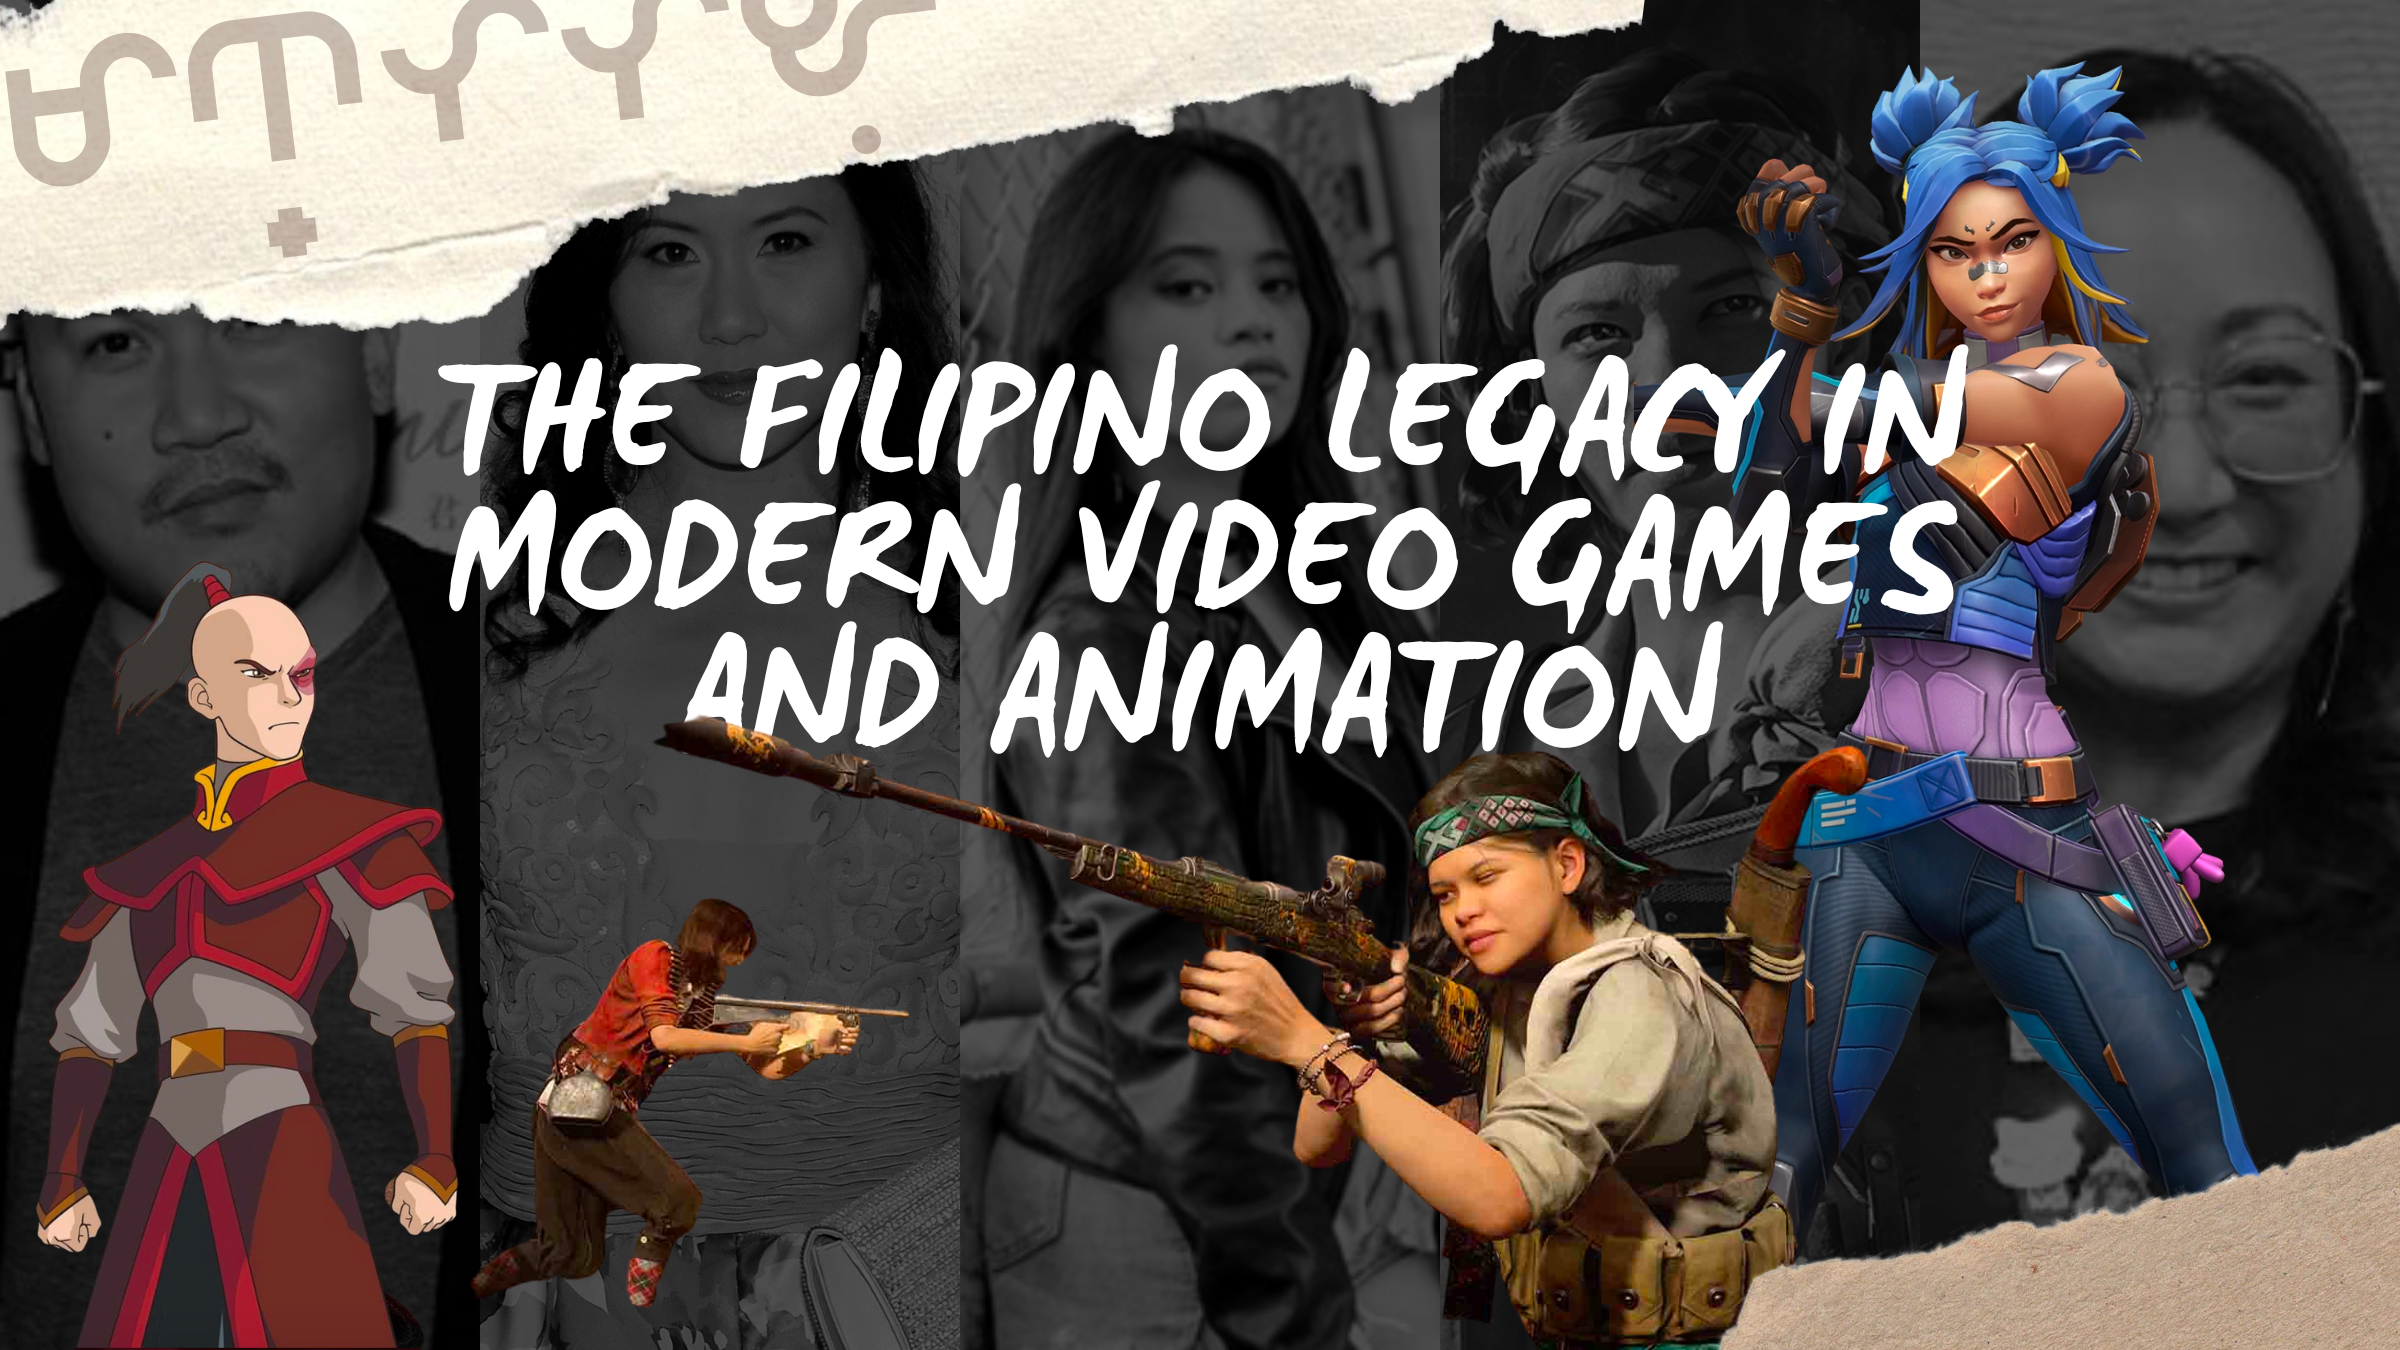 The Filipino Legacy In Modern Video Games and Animation